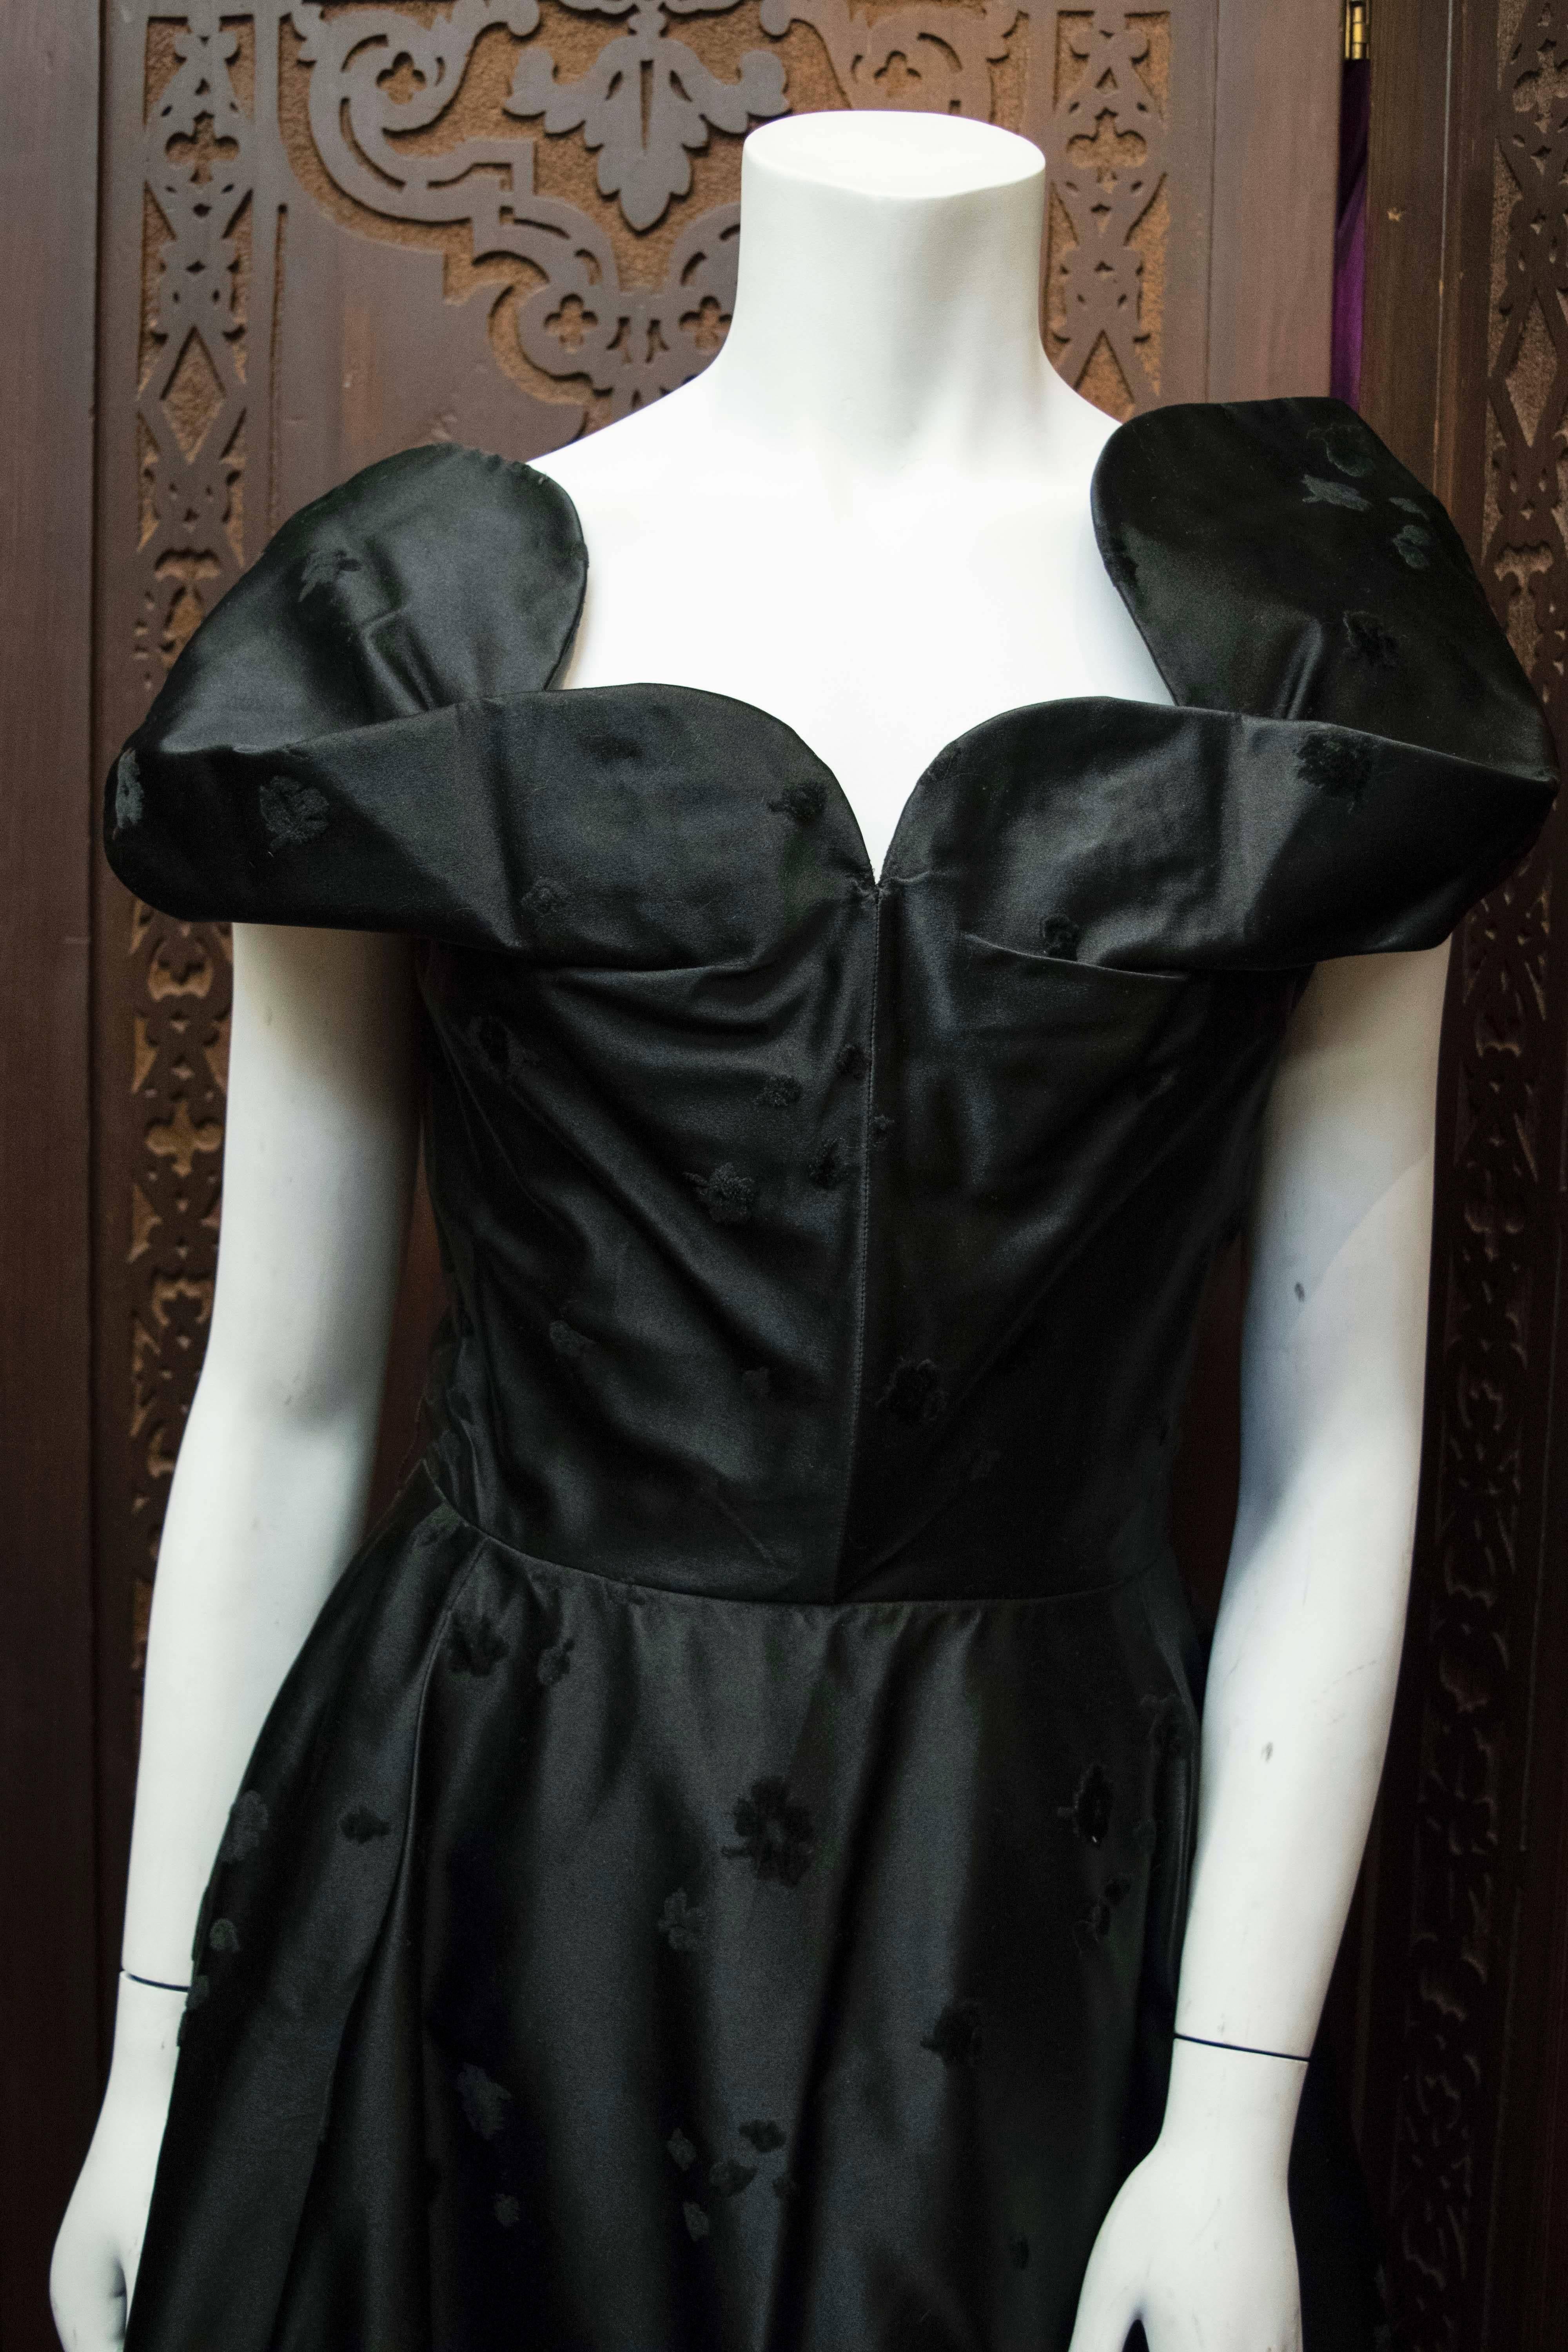 Black 1950s Cocktail Dress

Gorgeously fitted 1950s cocktail dress in a black silk satin. Sculptural lapels and a stunning full skirt. 

B 32
W 26
H 44
L 46